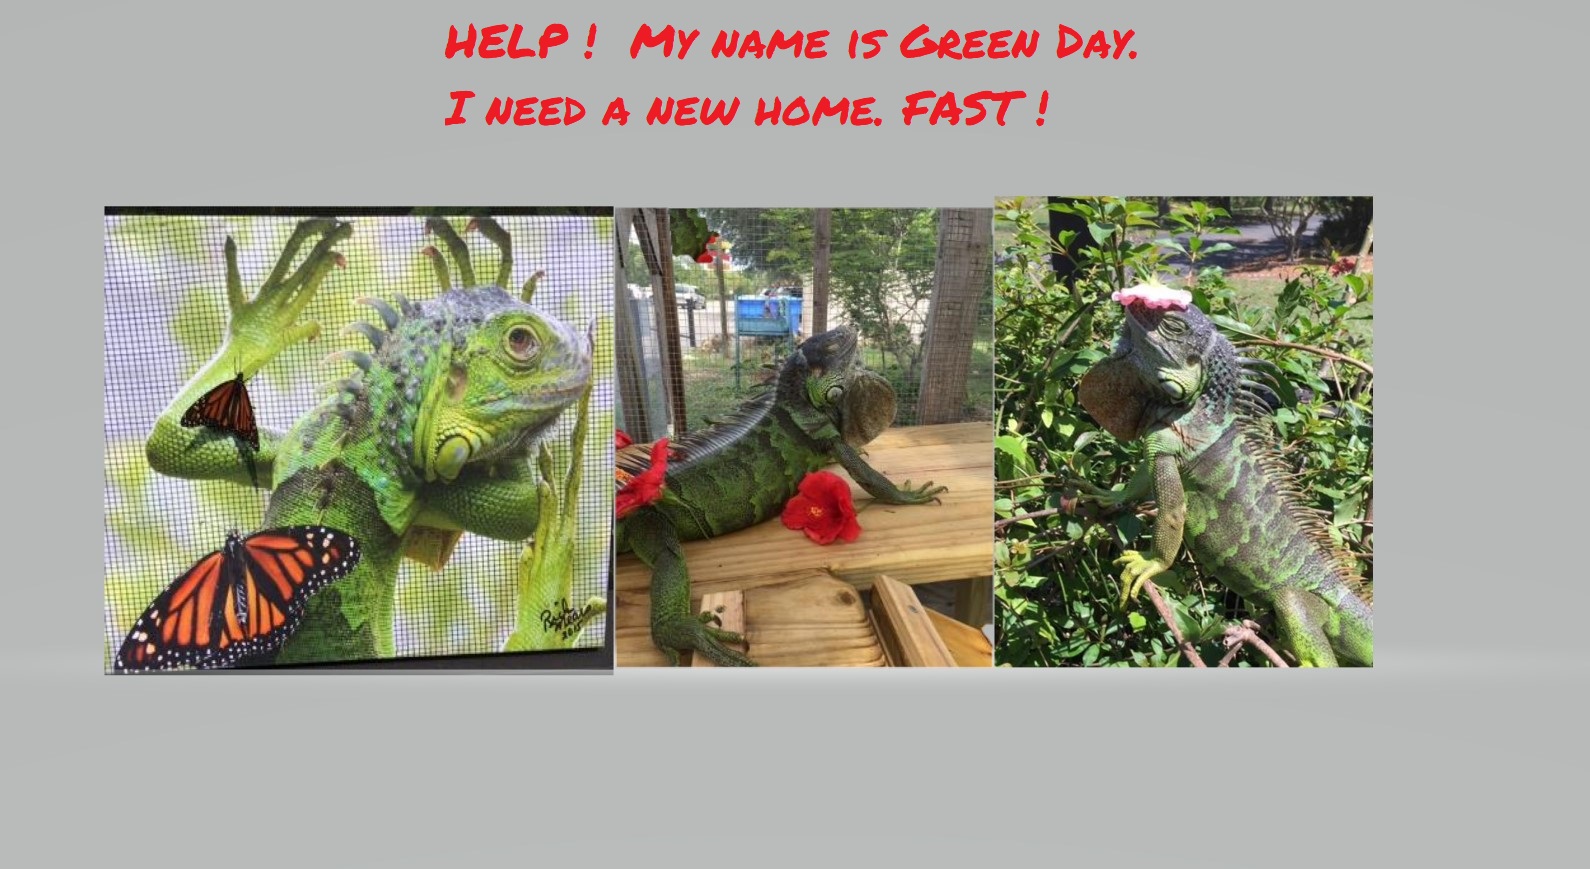 Please help CCFW fund a new cage for me to comply with new FWC requirements.  
